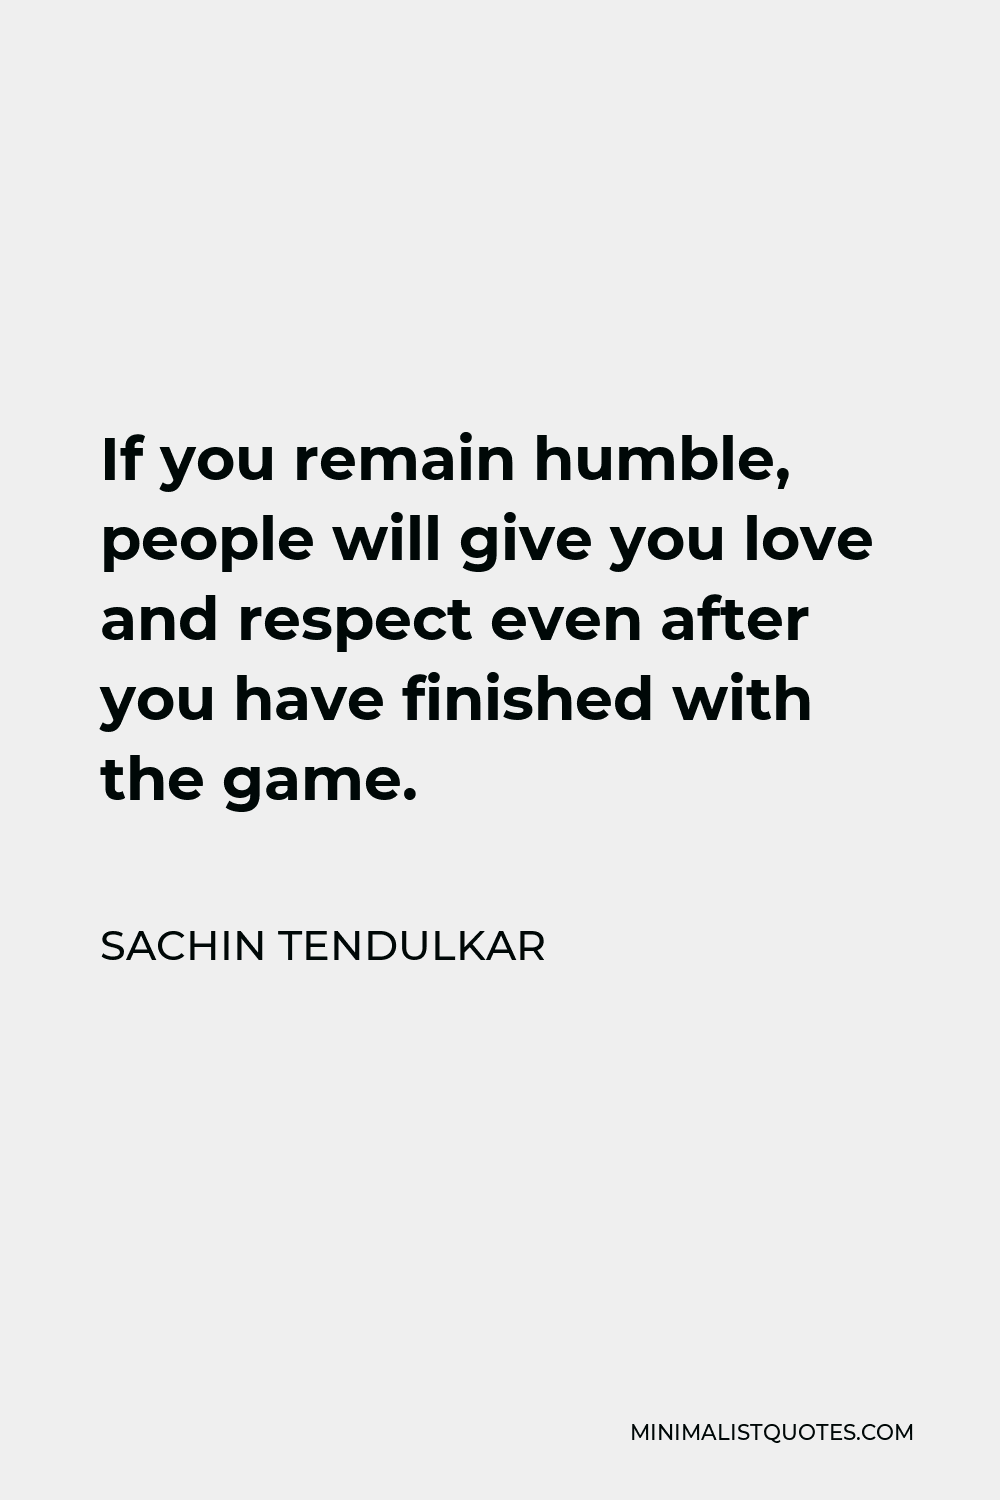 Sachin Tendulkar Quote - If you remain humble, people will give you love and respect even after you have finished with the game.